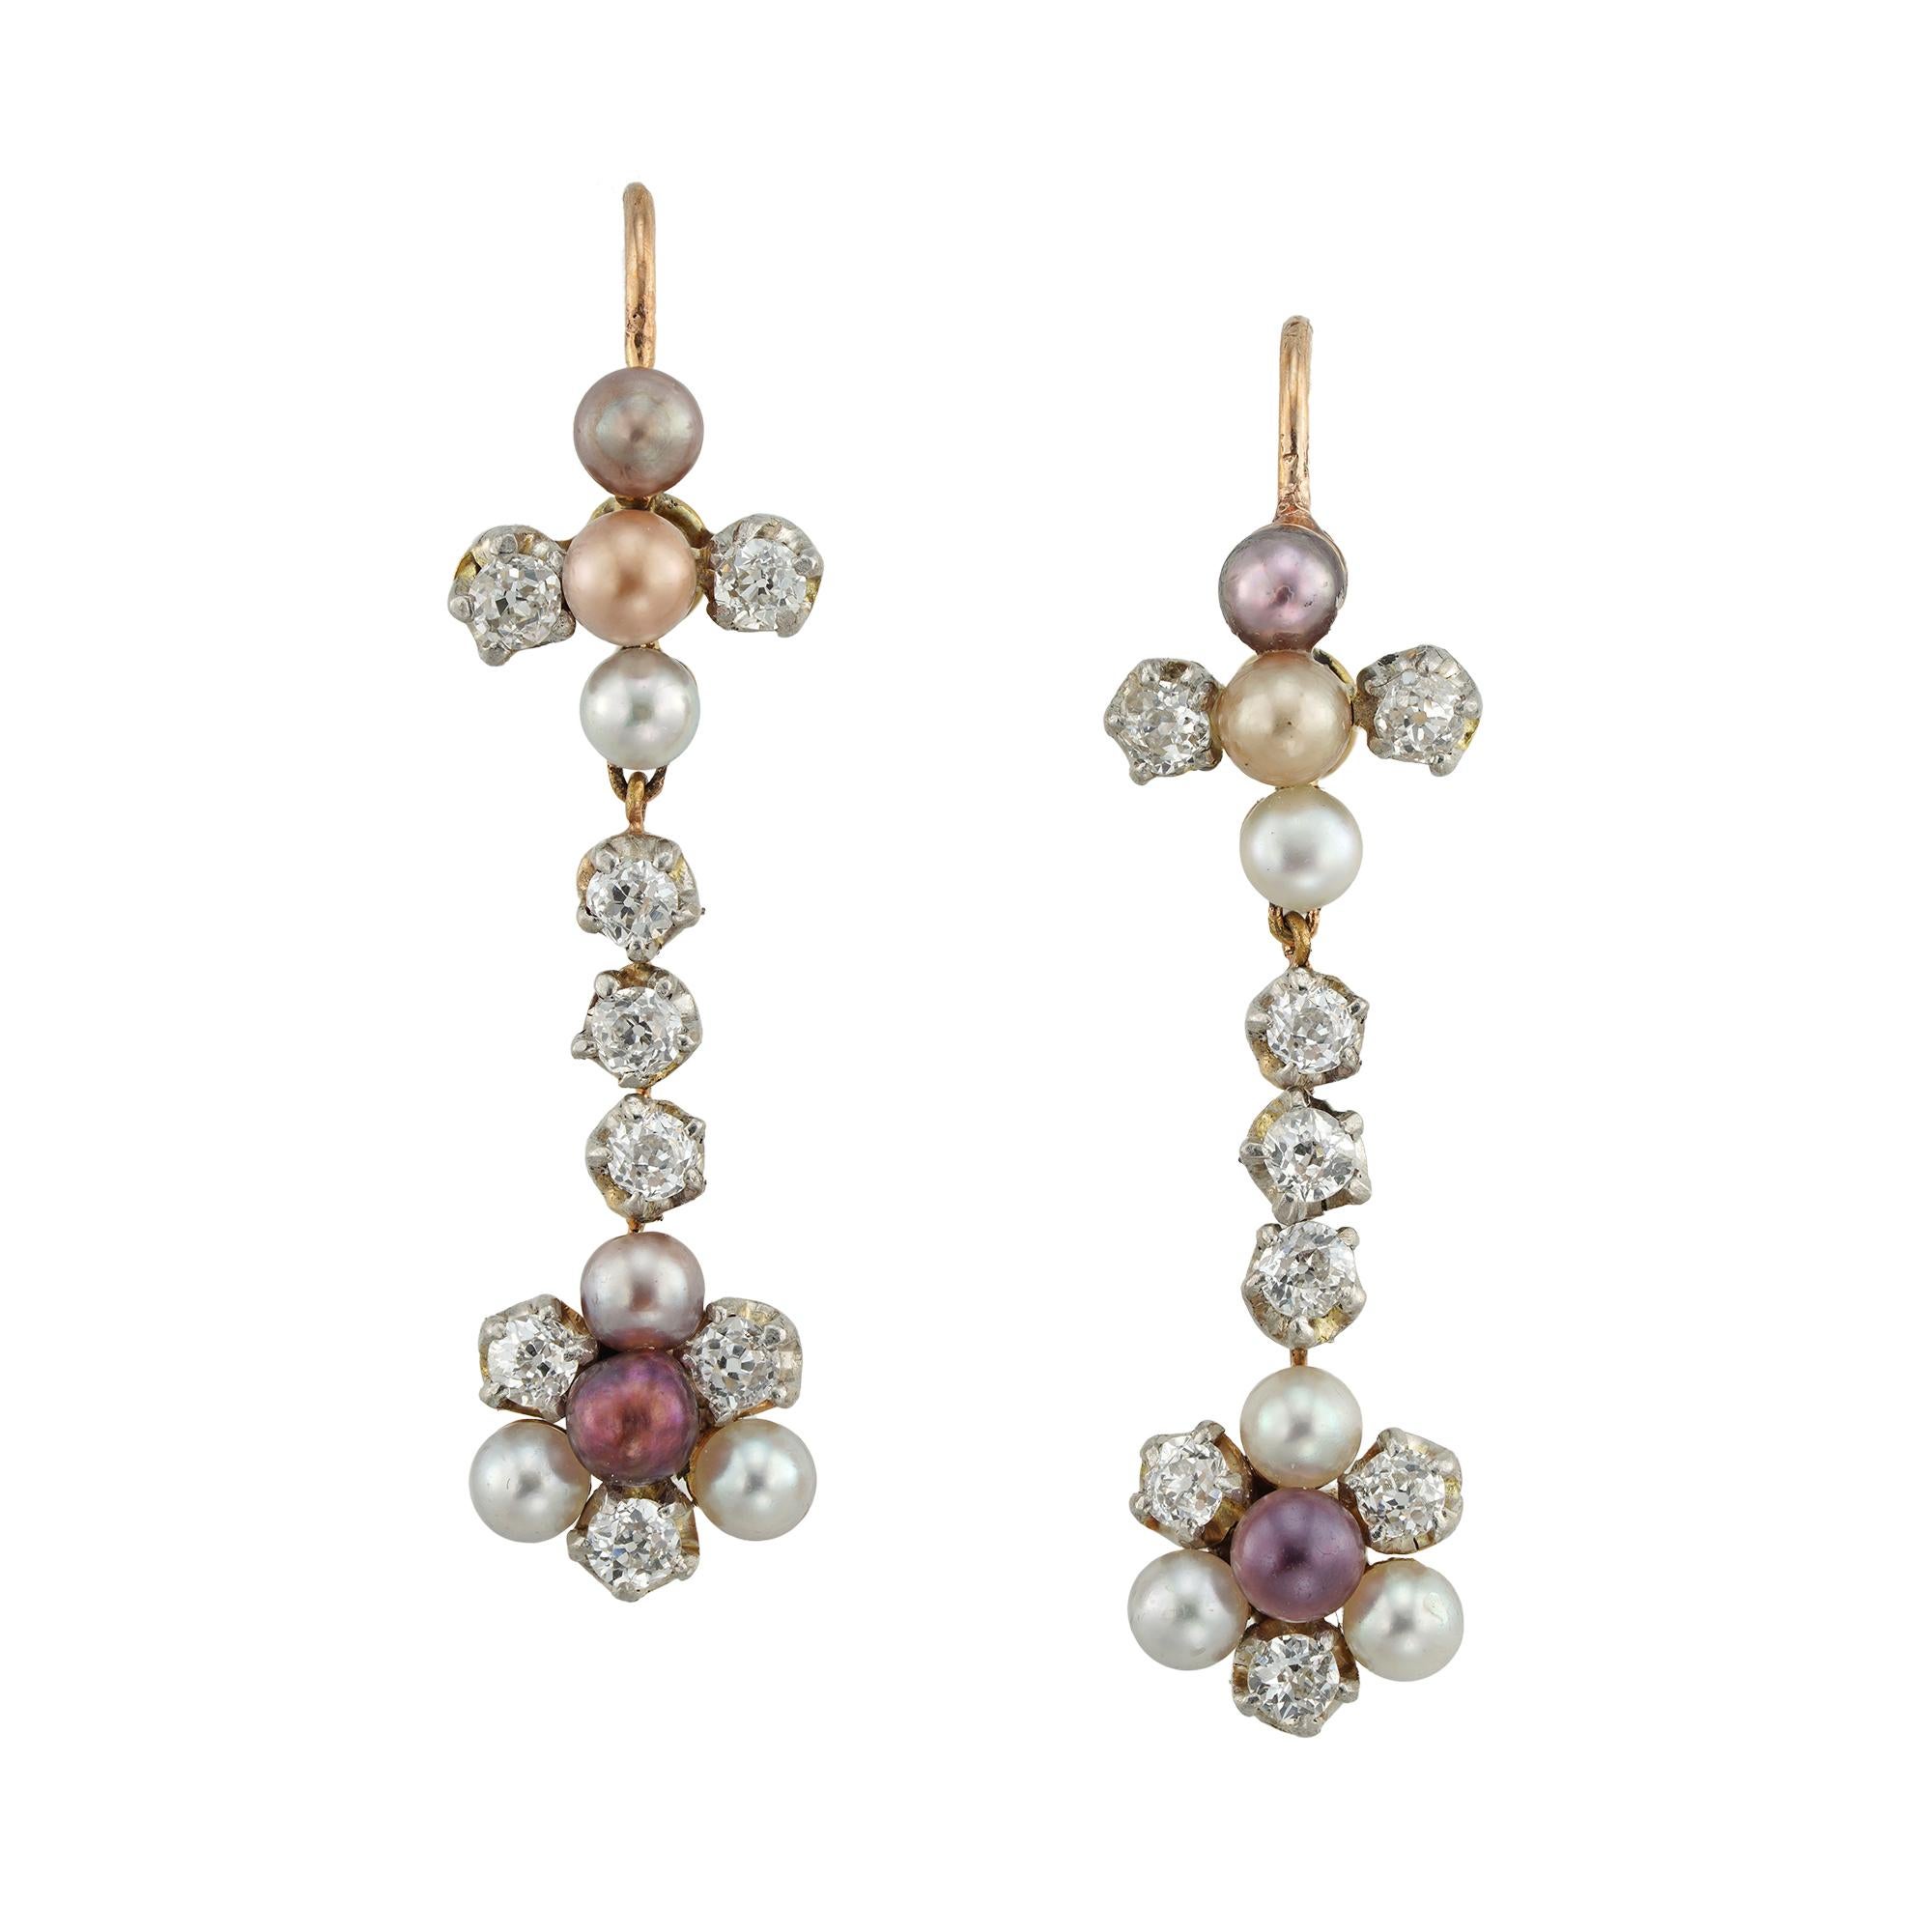 A pair of Edwardian pearl and diamond earrings, each top bearing a cross, vertically set with three pearls and two old-cut diamond set arms, suspending a diamond-set run, suspending a pearl and diamond set cluster, the multicolored pearls